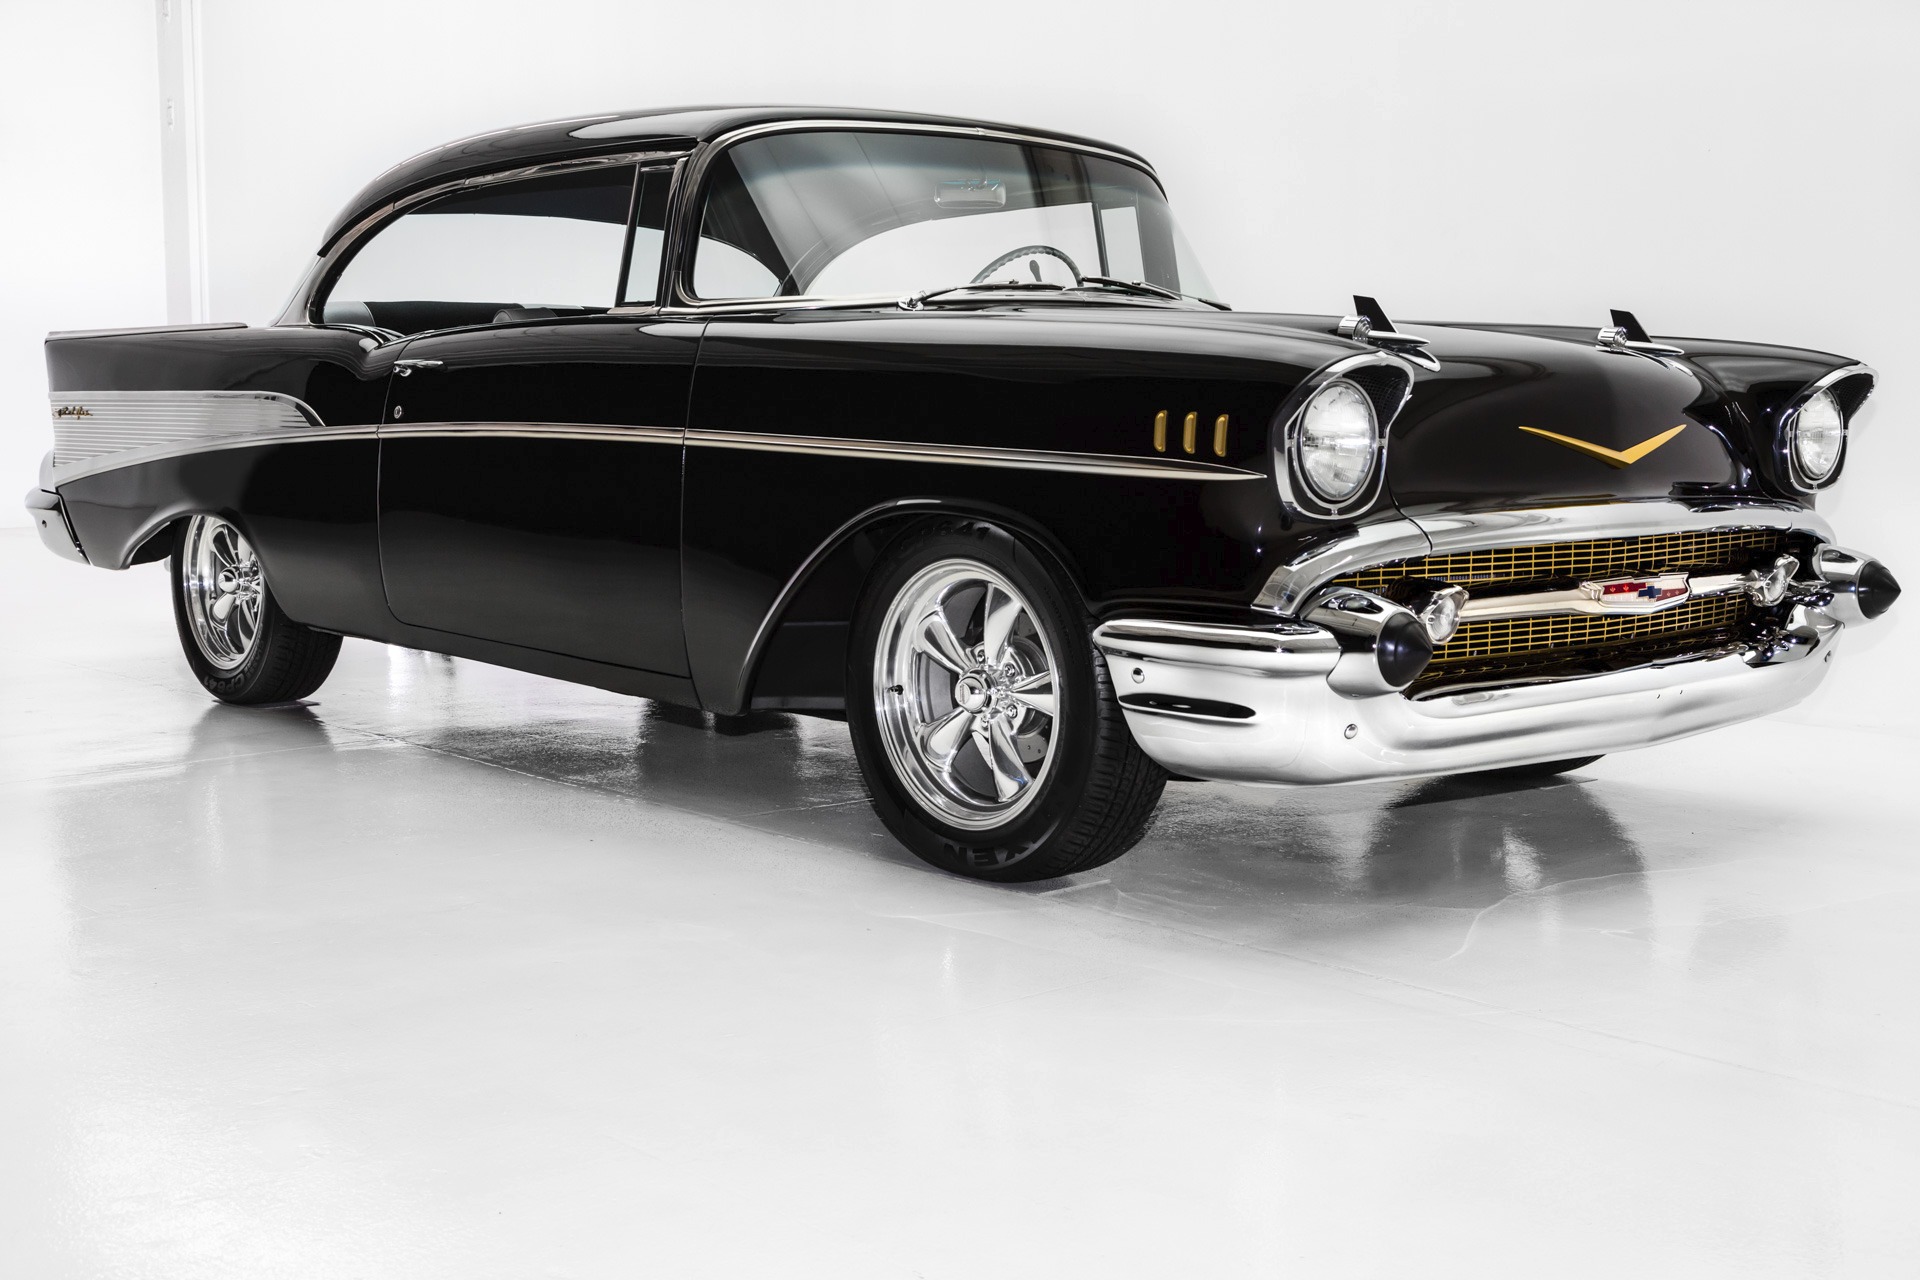 For Sale Used 1957 Chevrolet Bel Air New Black Paint & New Silver/Black Interior 327 Auto, Lots of new Chrome | American Dream Machines Des Moines IA 50309